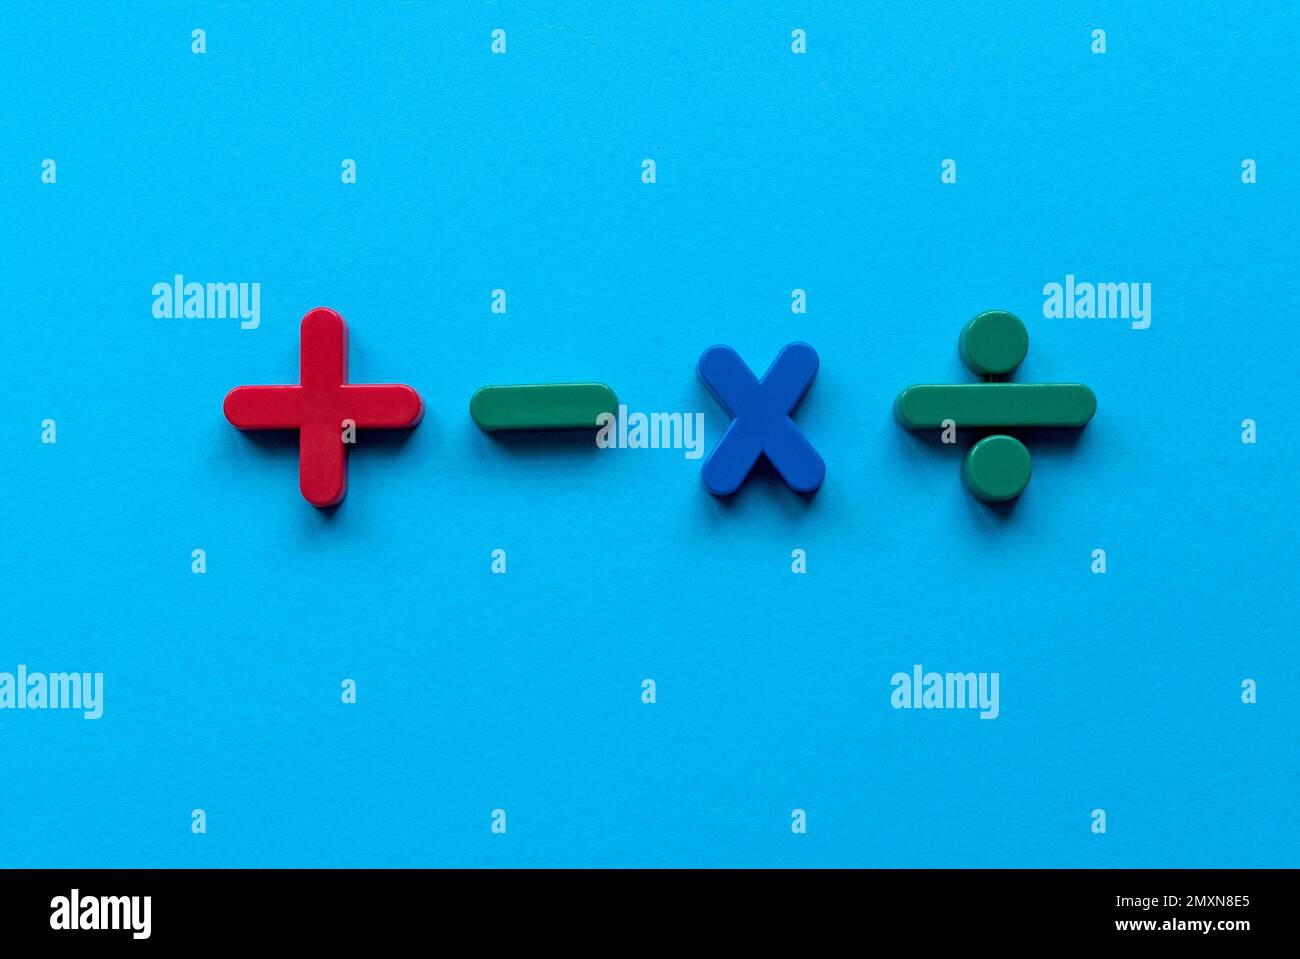 Colorful mathematical shape (Plus, minus, multiply, divide) on blue background. Stock Photo